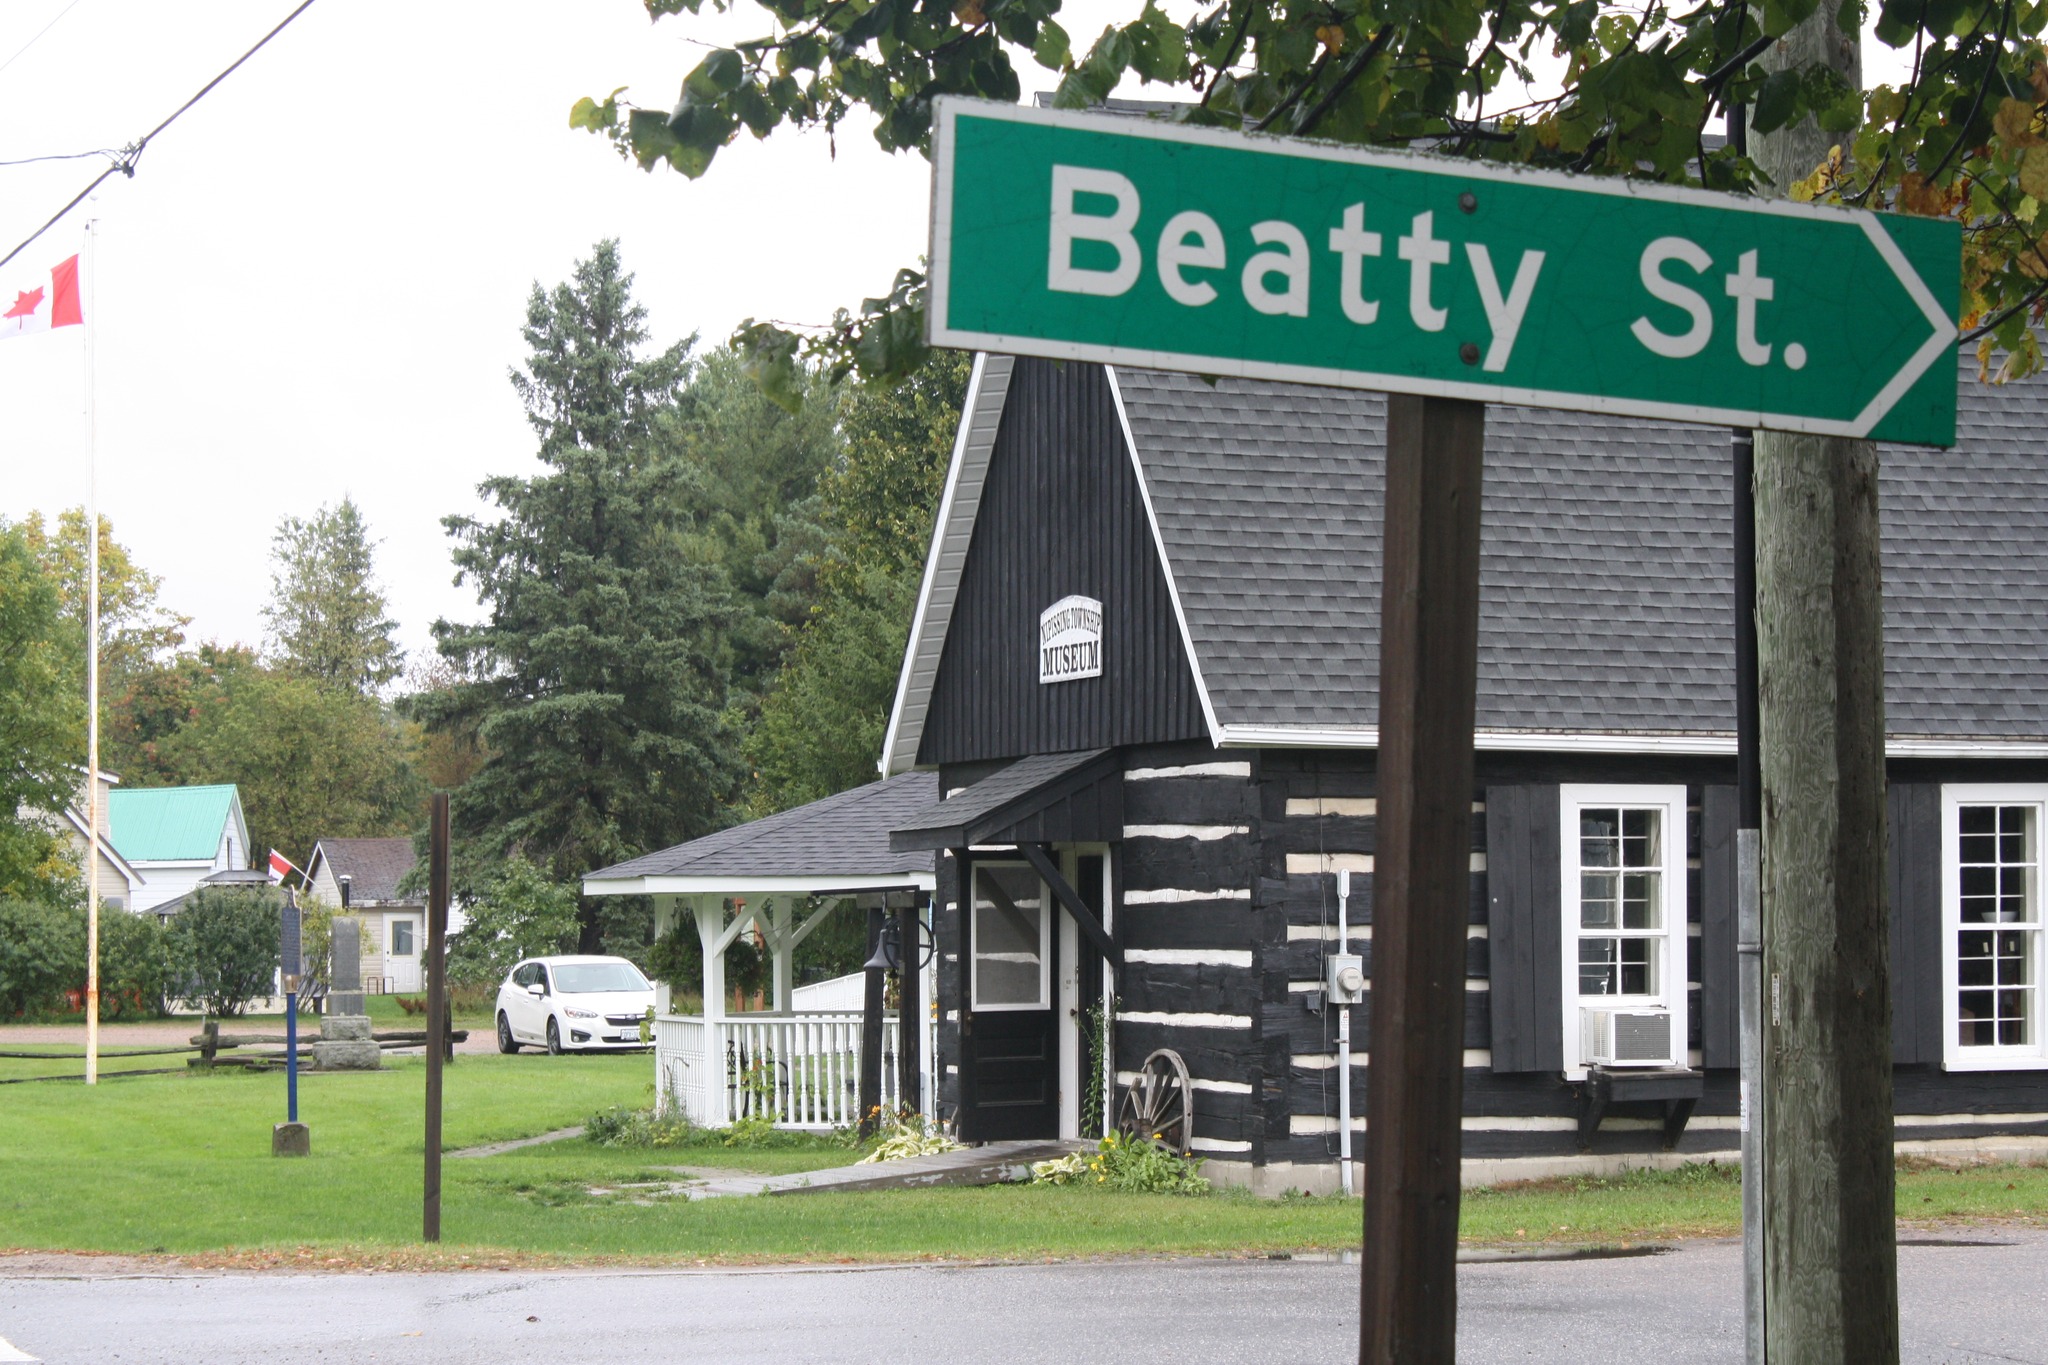 a brown and white painted wooden log A-frame church from the early 1900s, now part of the Nipissing Township Museum. A street sign in the foreground reads "Beatty St.".